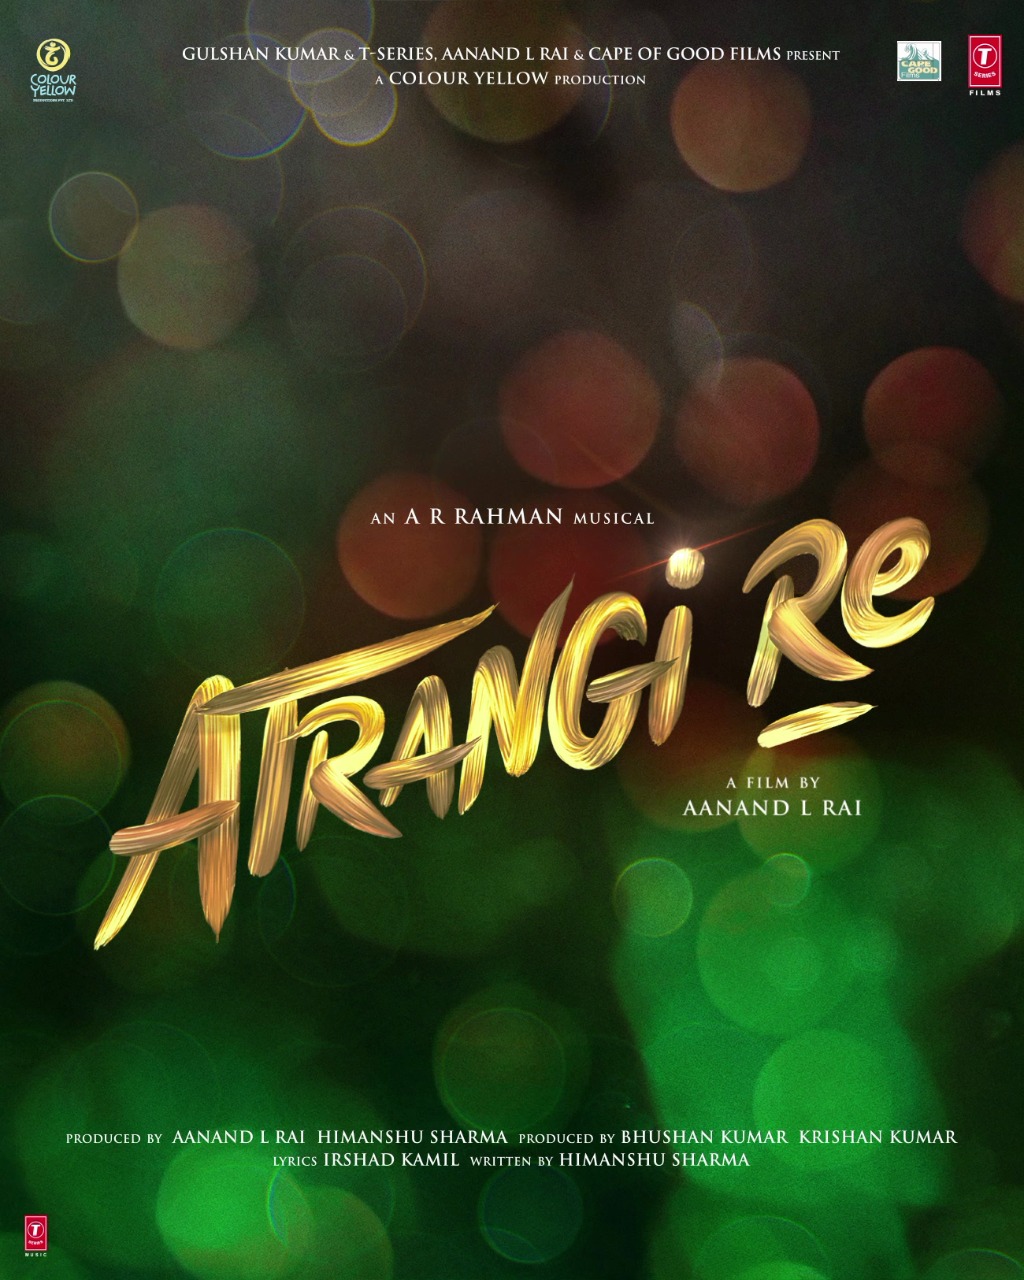 Aanand L Rai unveils character motion posters for Atrangi